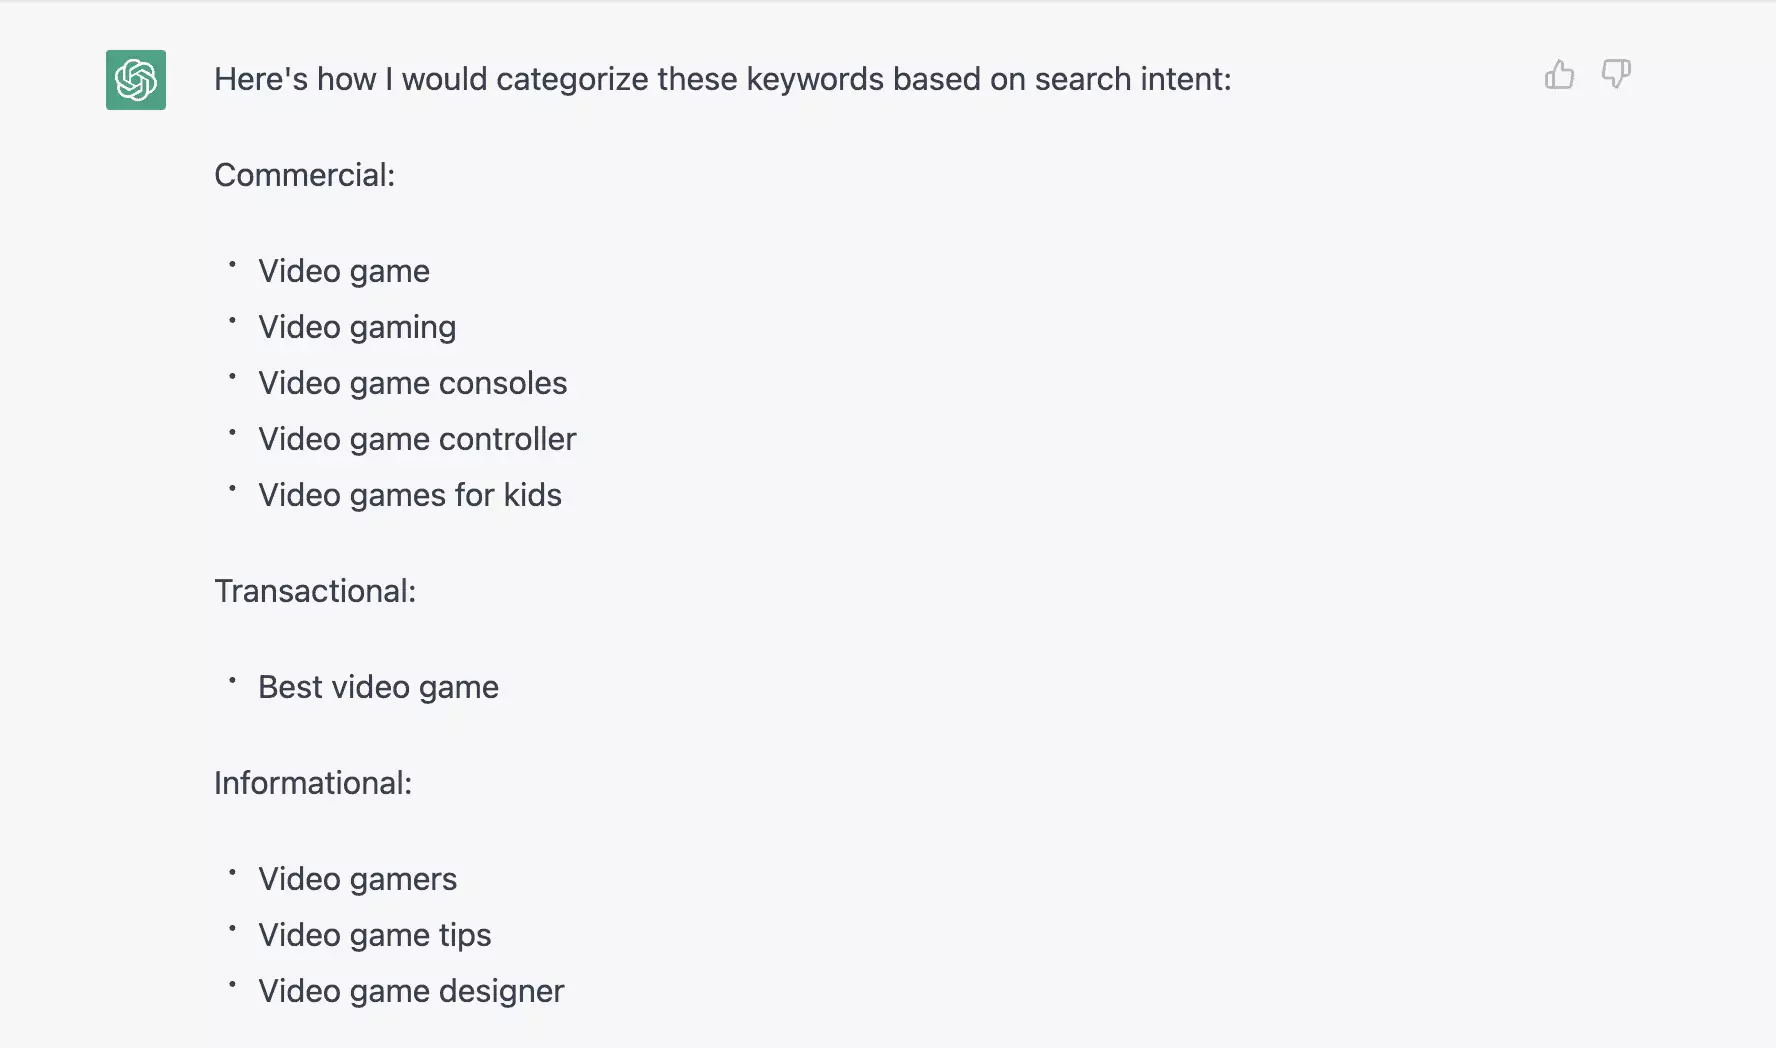 Results for asking ChatGPT to categorize a list of keywords